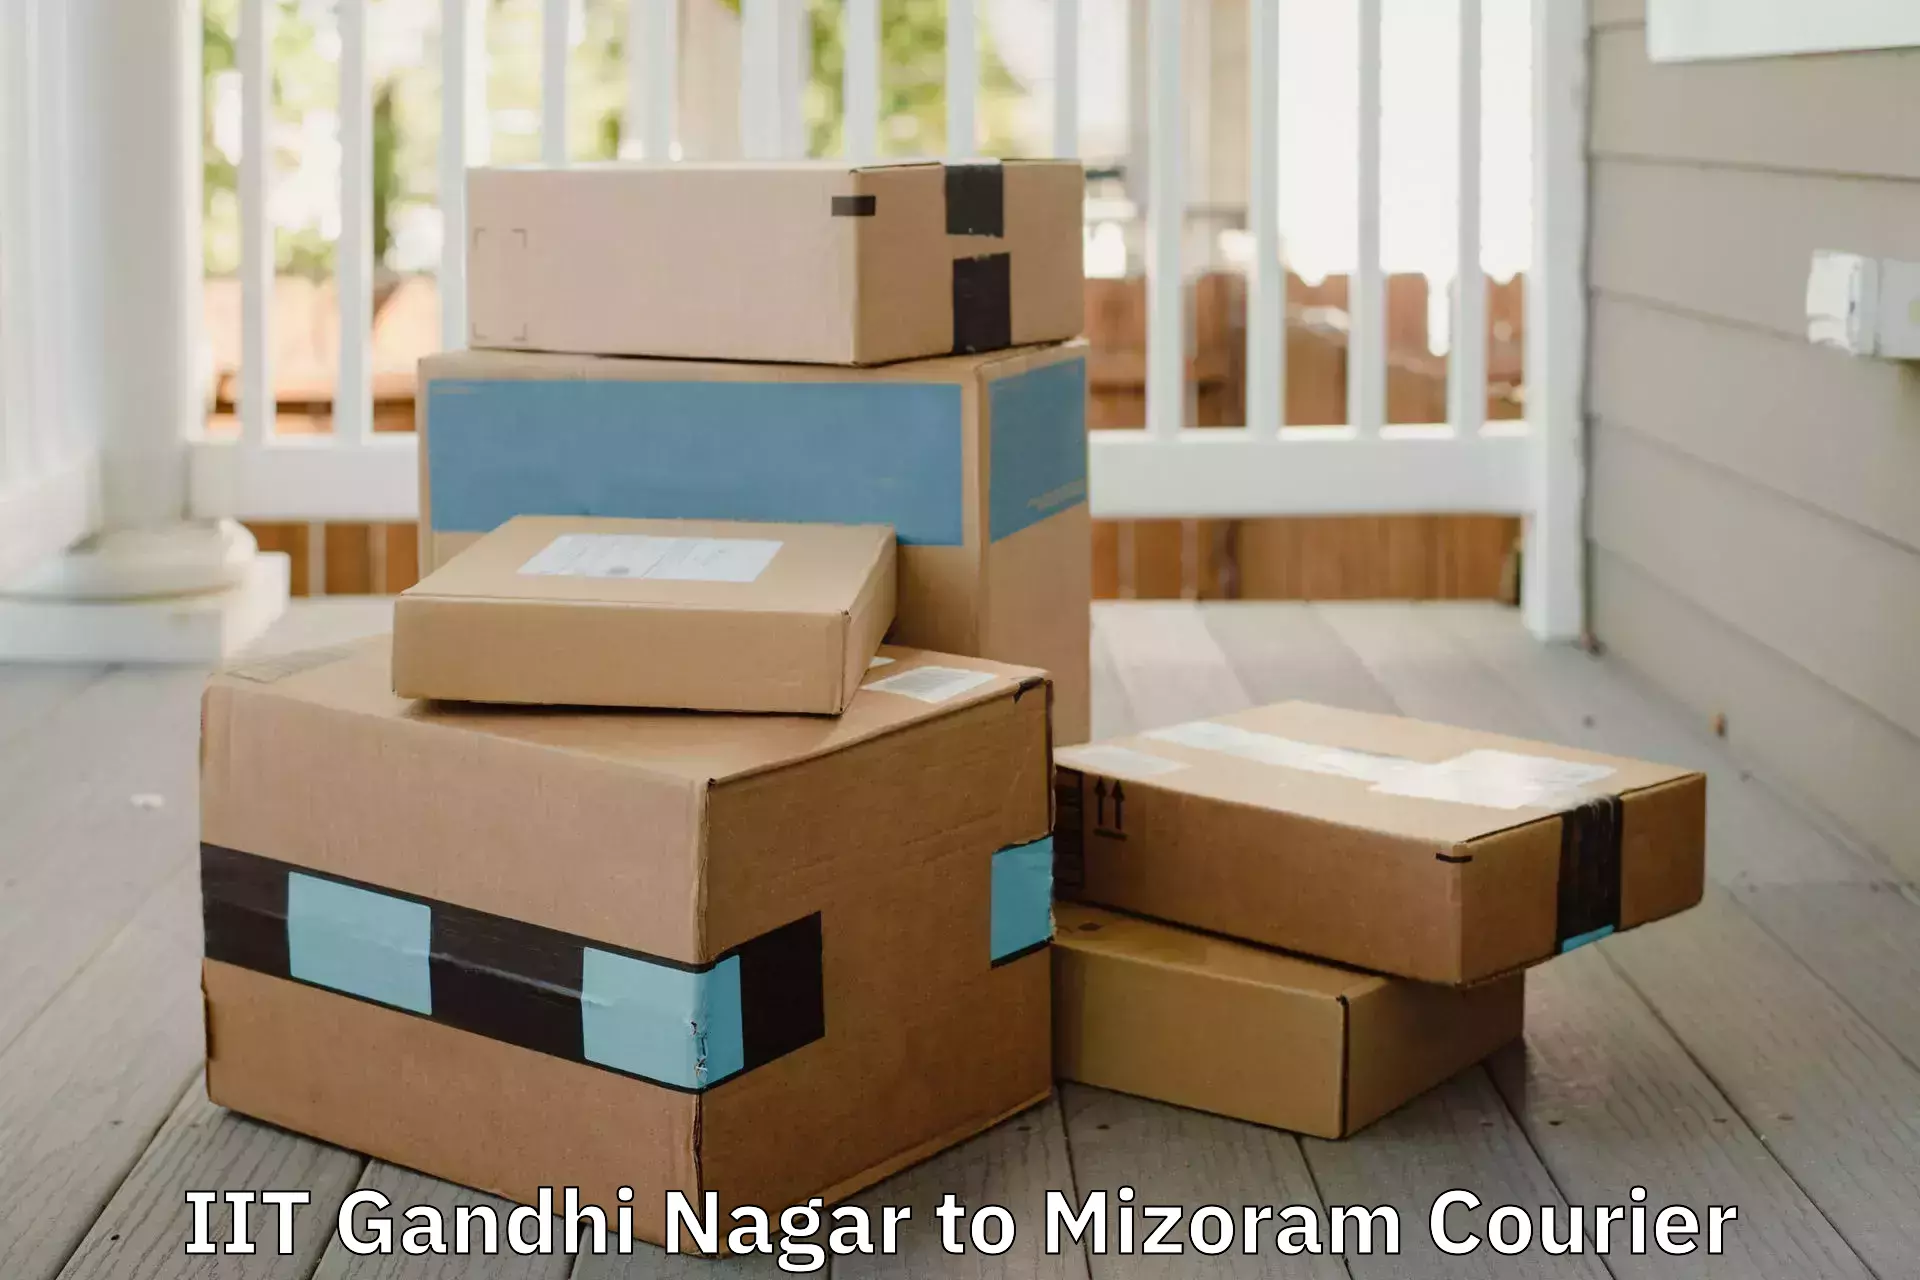 Full home relocation services IIT Gandhi Nagar to Lunglei